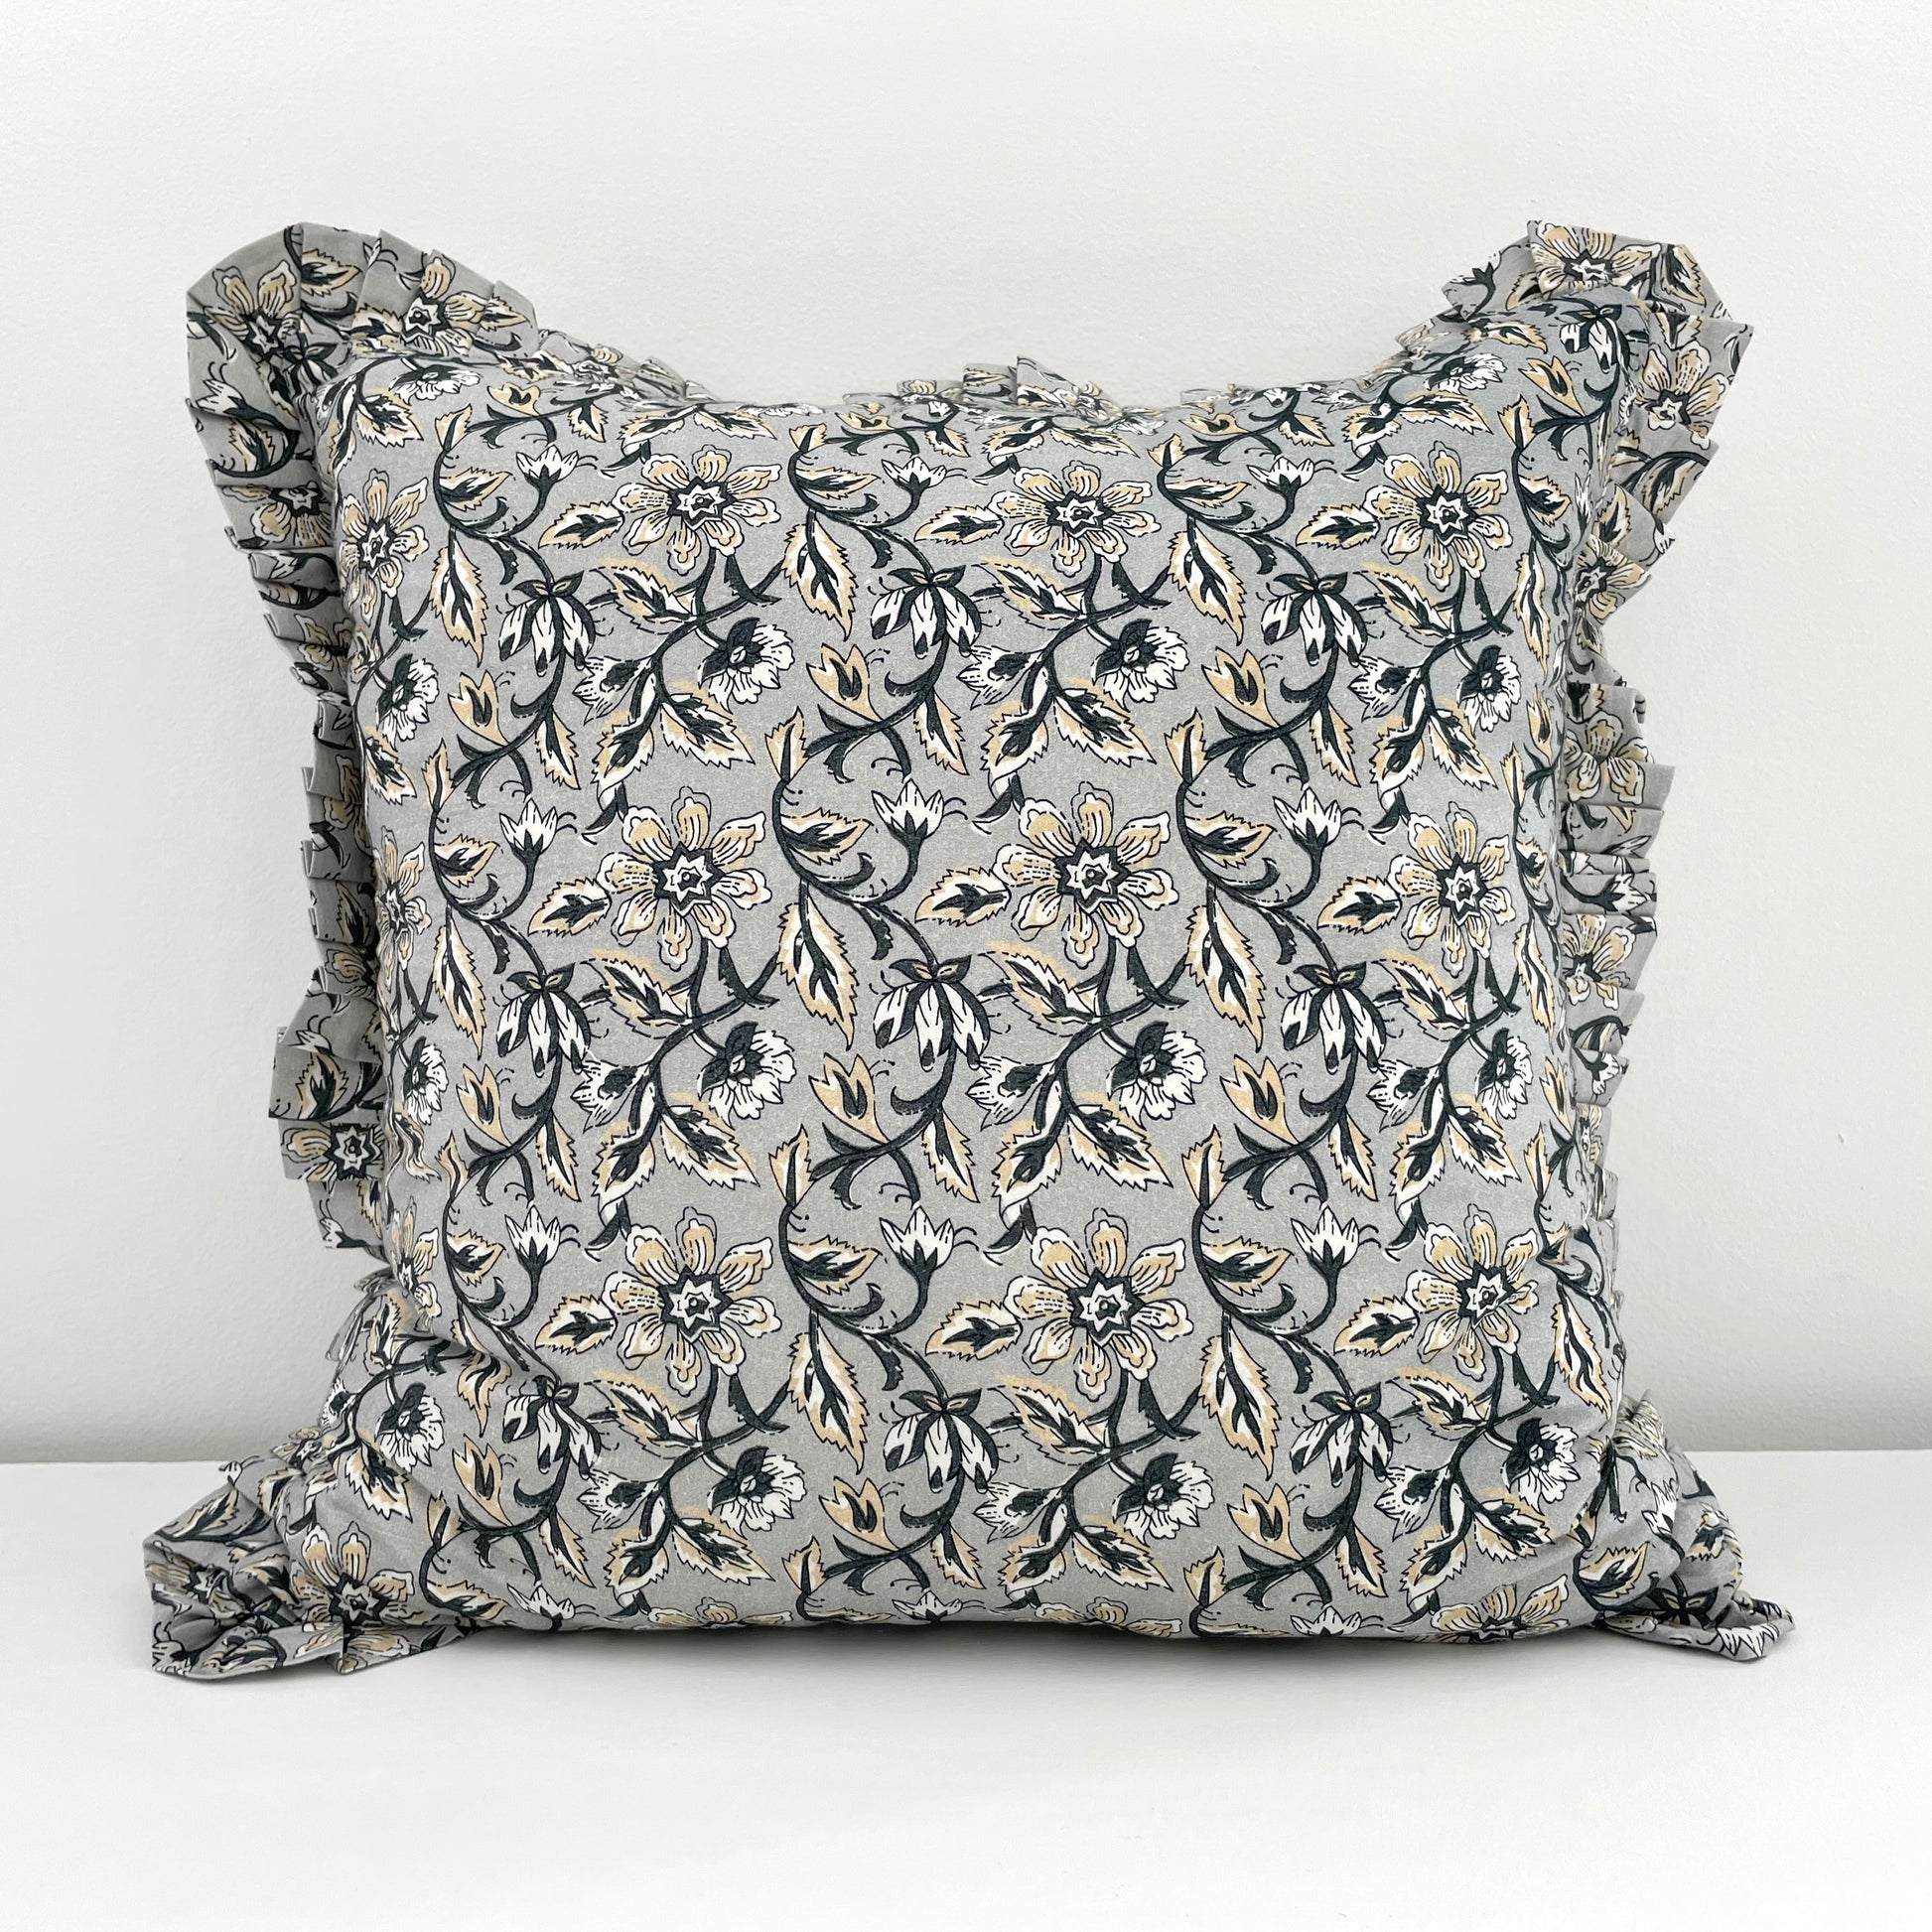 grey and blue vintage floral 18x18 square 100 percent cotton pillow cover with ruffled edges